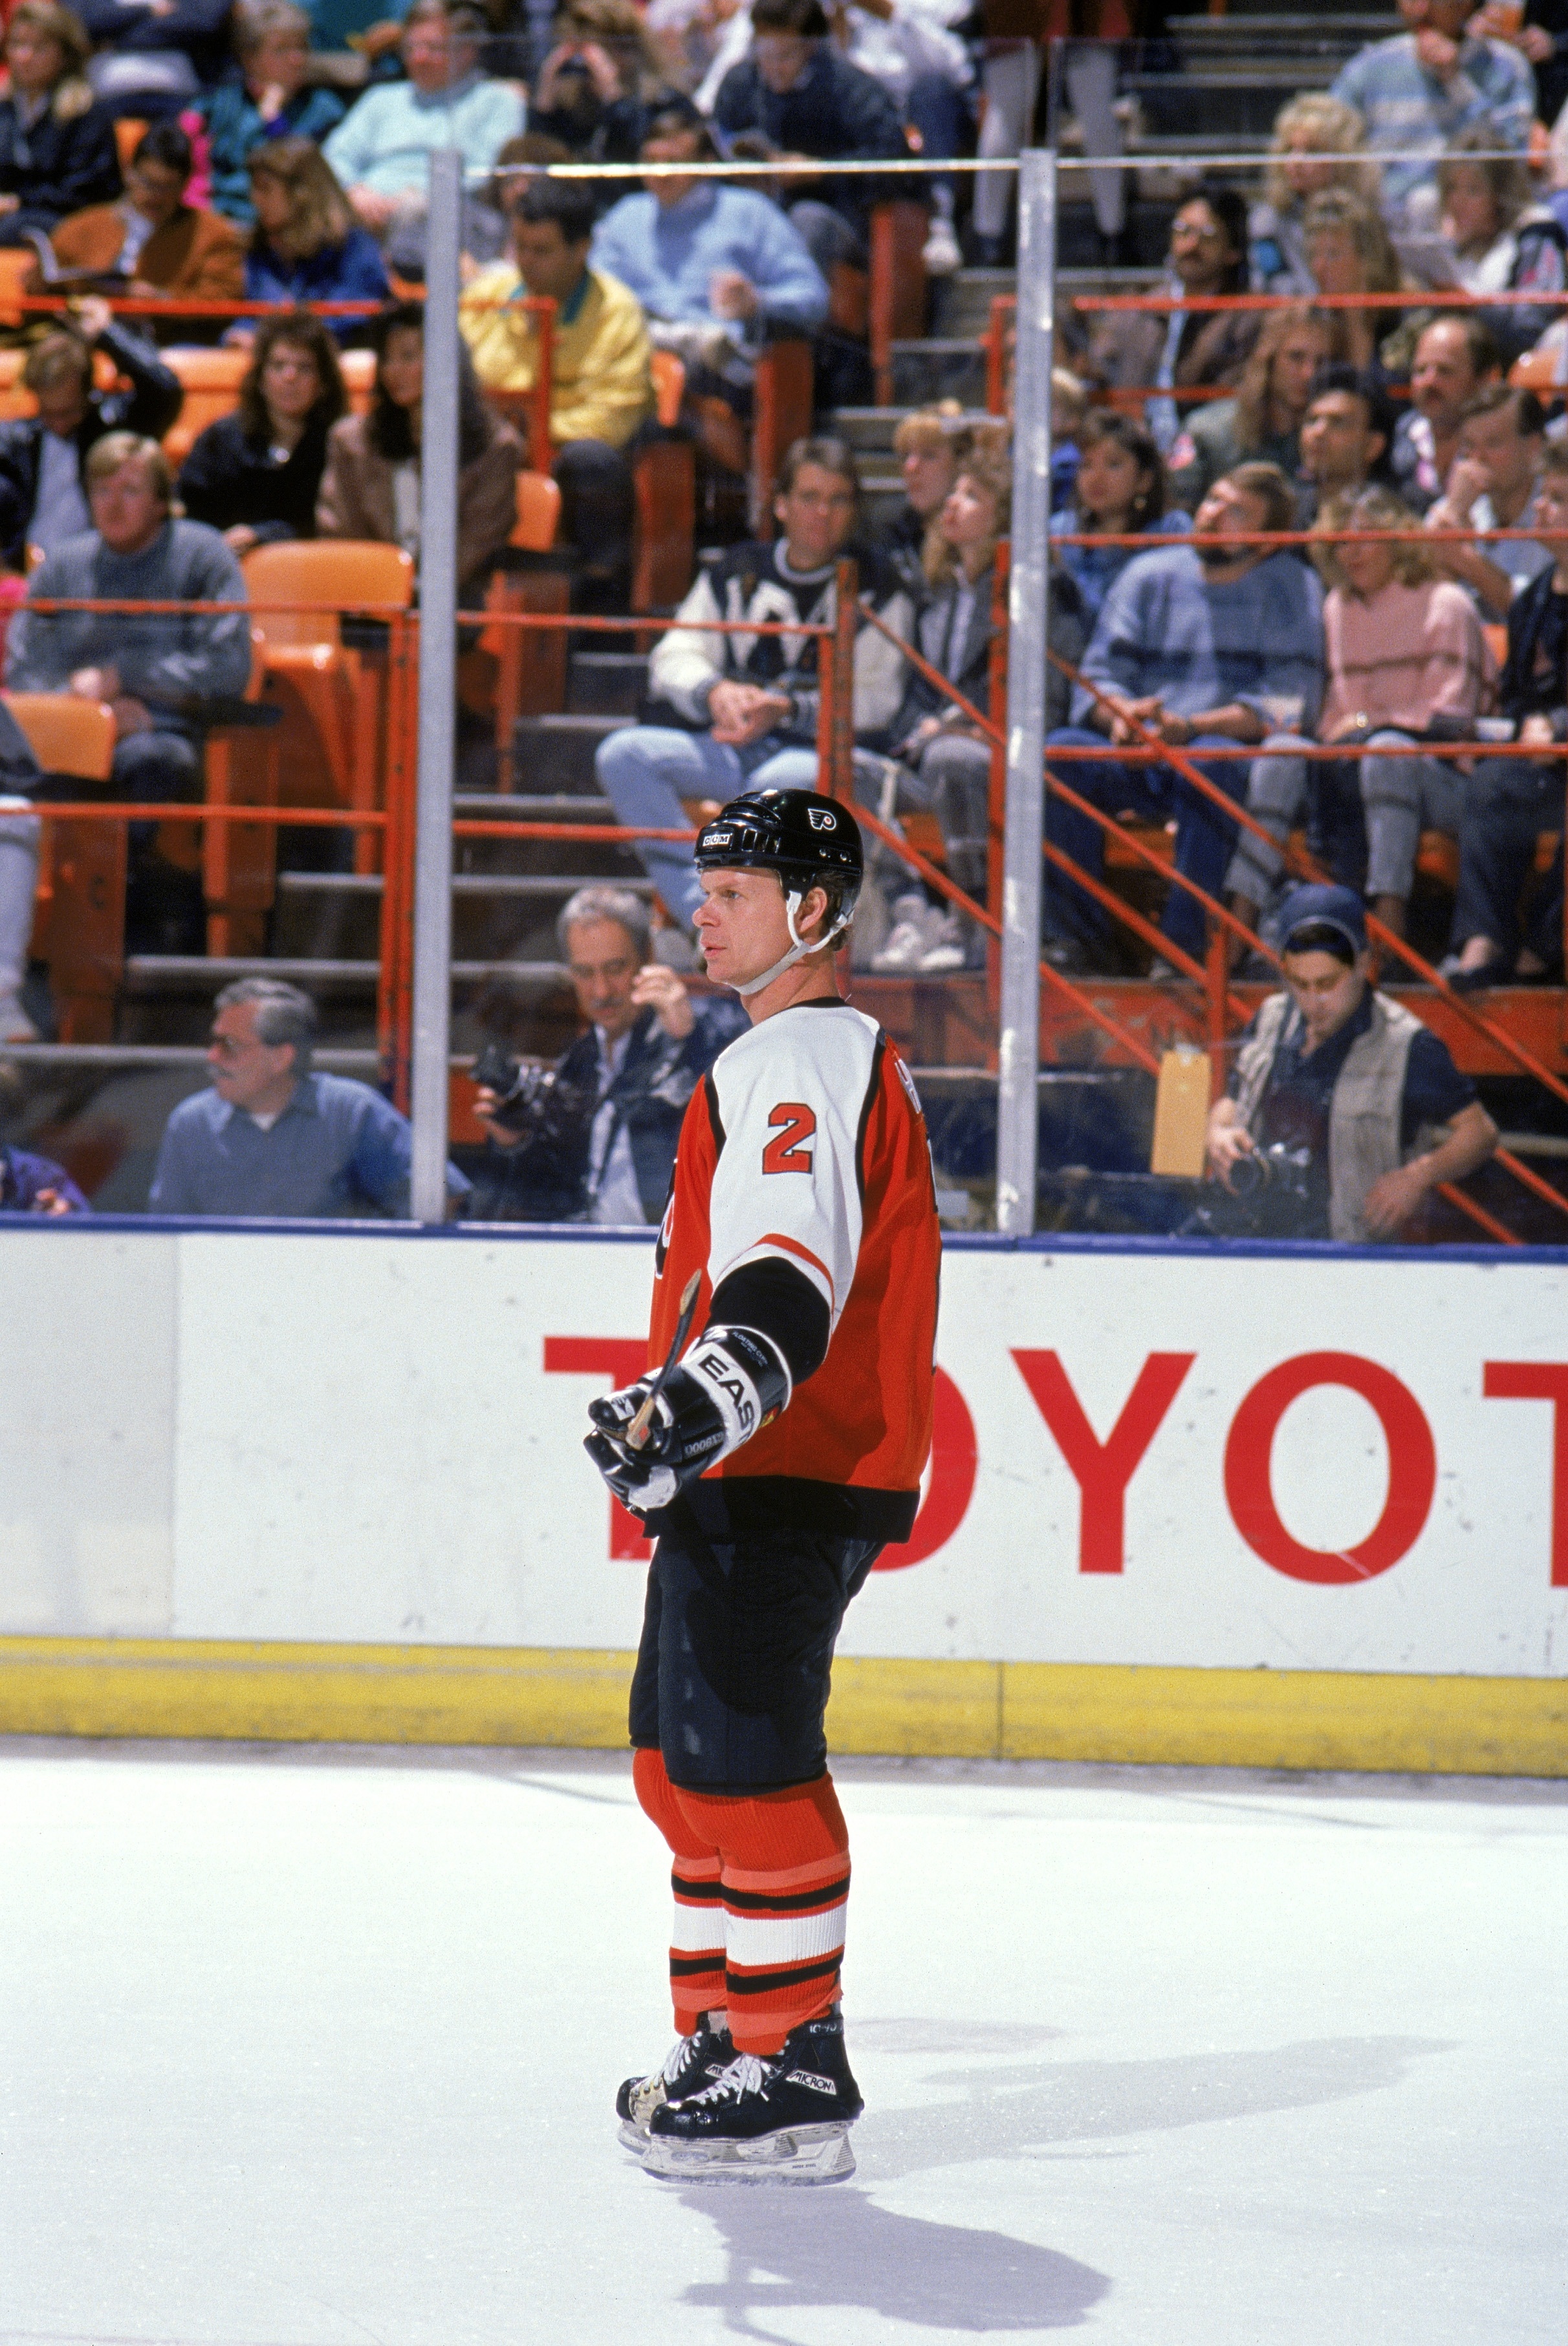 INGLEWOOD, CA - 1989:  Defense Mark Howe #2 of the Philadelphia Flyers skates on the ice during a game against the Los Angeles Kings during the 1989-90 season at the Great Western Forum in Inglewood, California.  (Photo by Ken Levine/Getty Images)